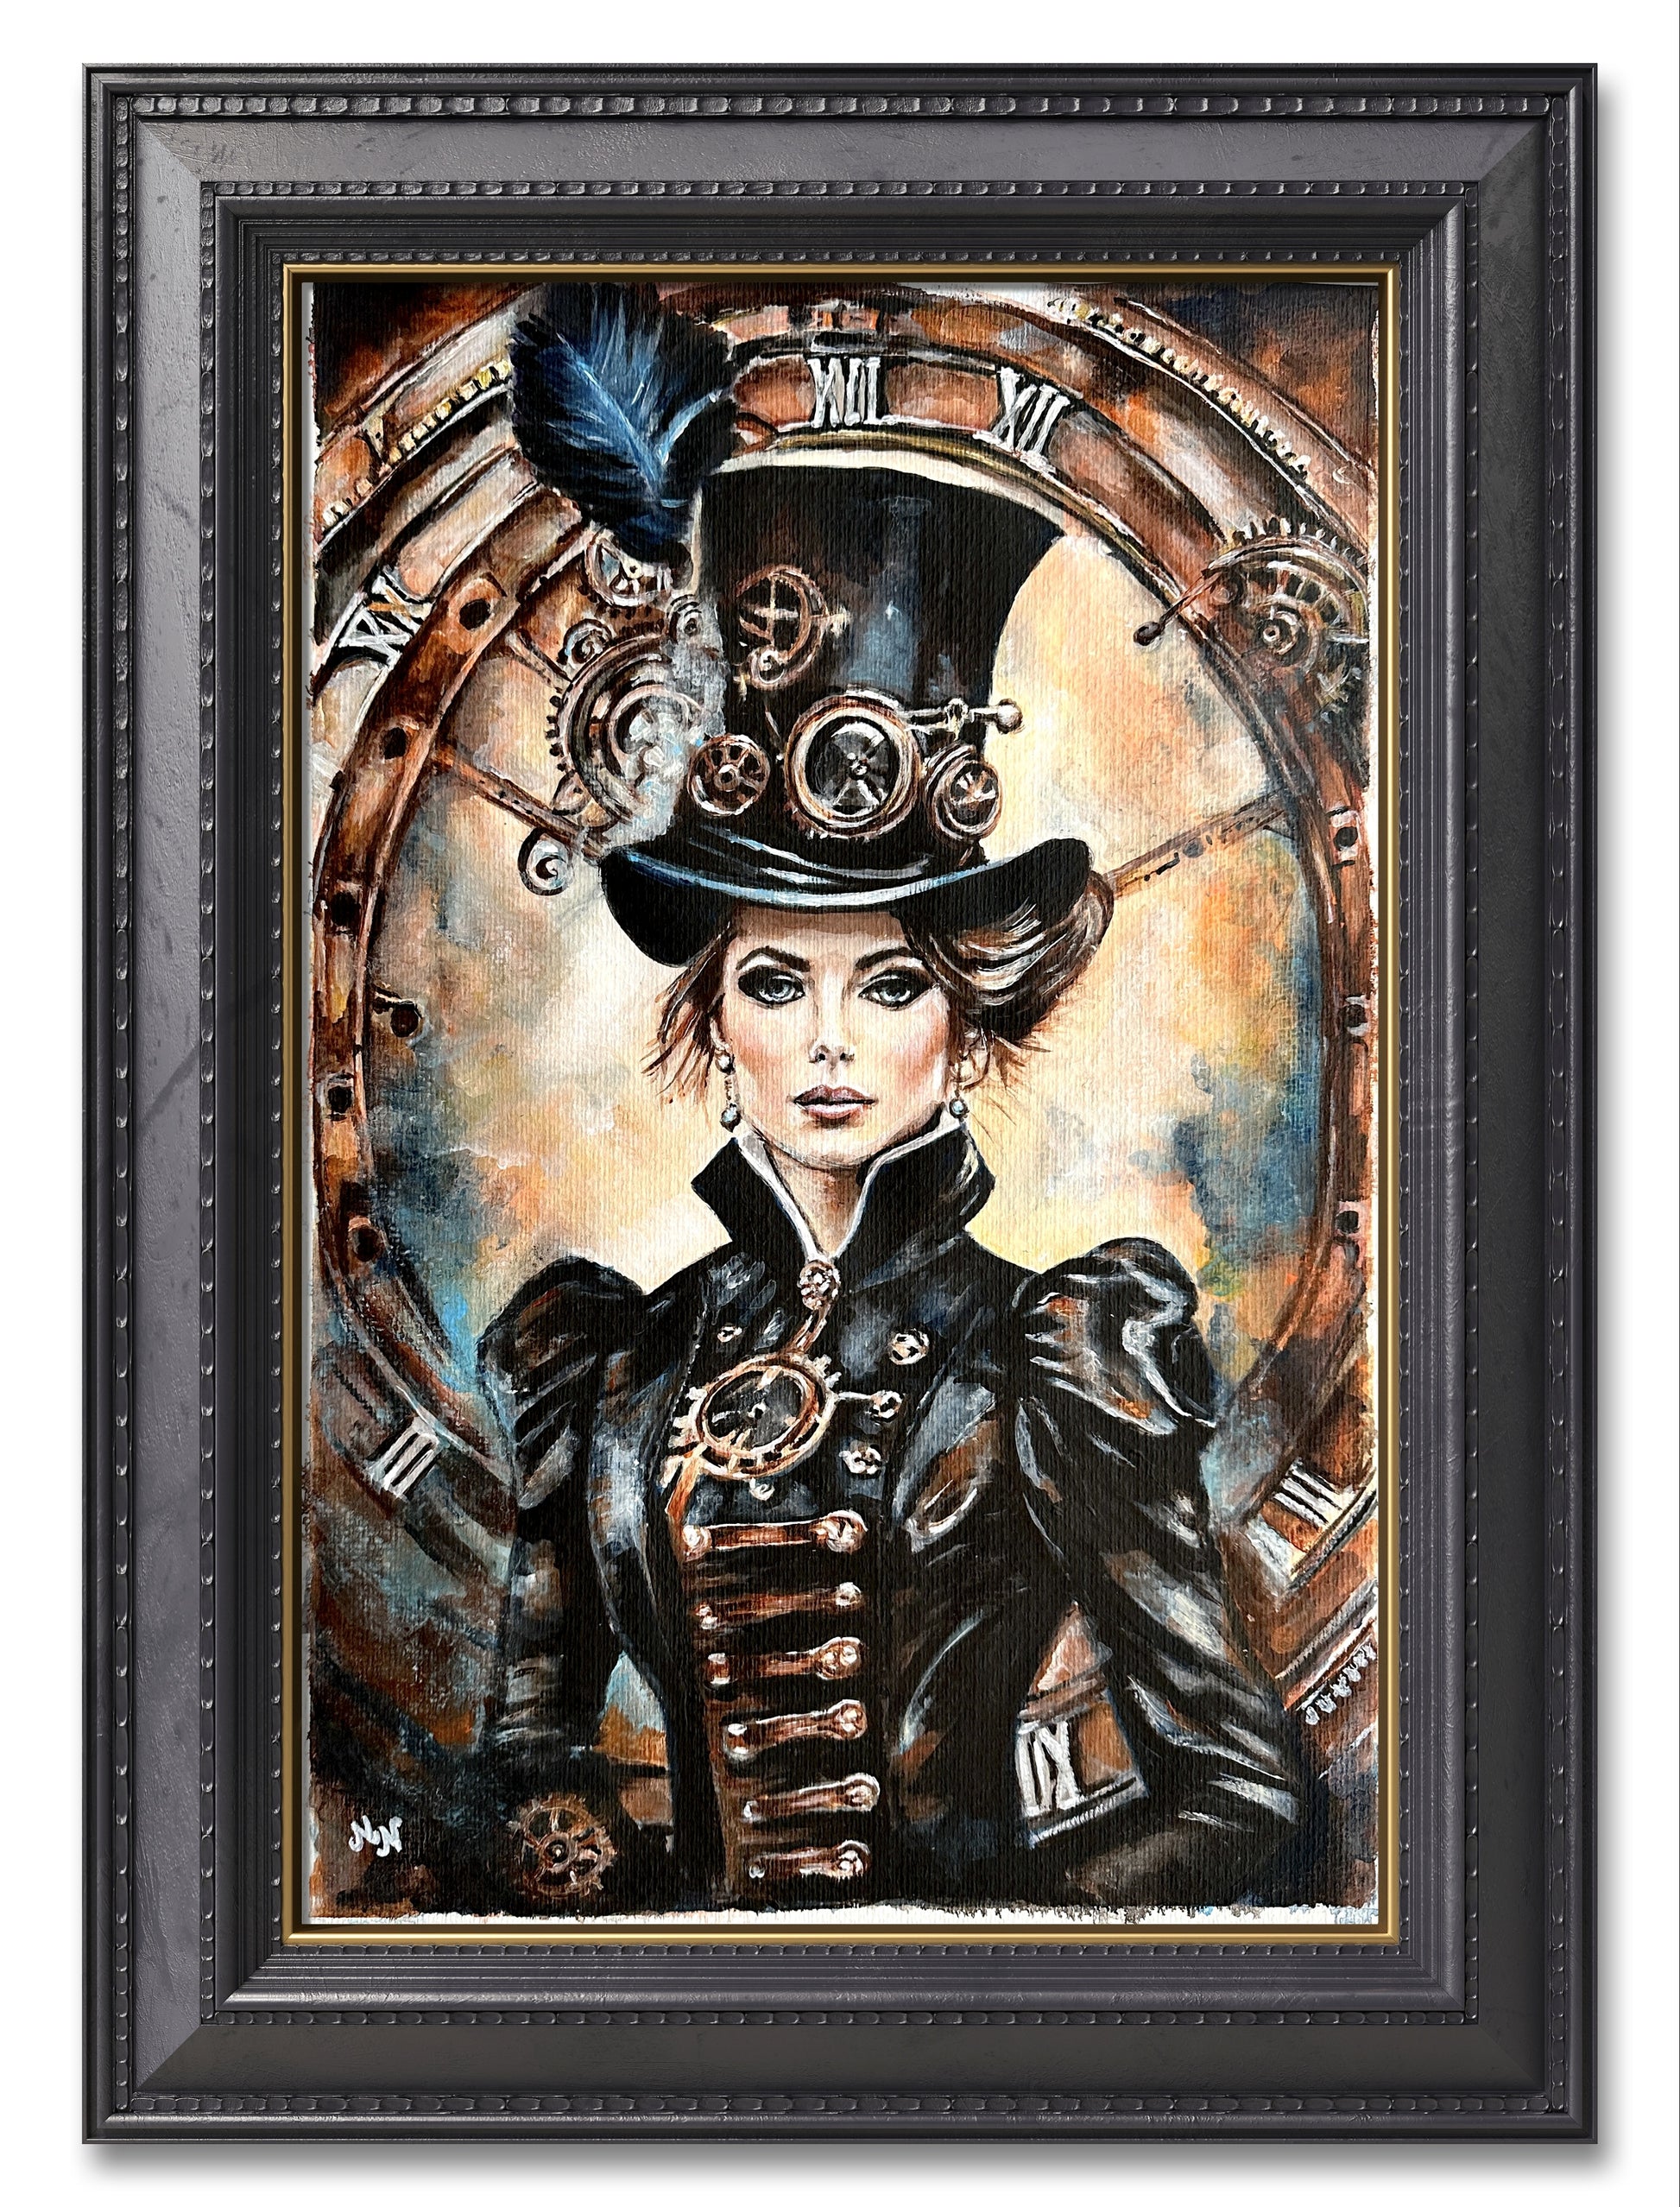 Steampunk Lady: Mesmerizing intersection of past and future in a captivating composition.